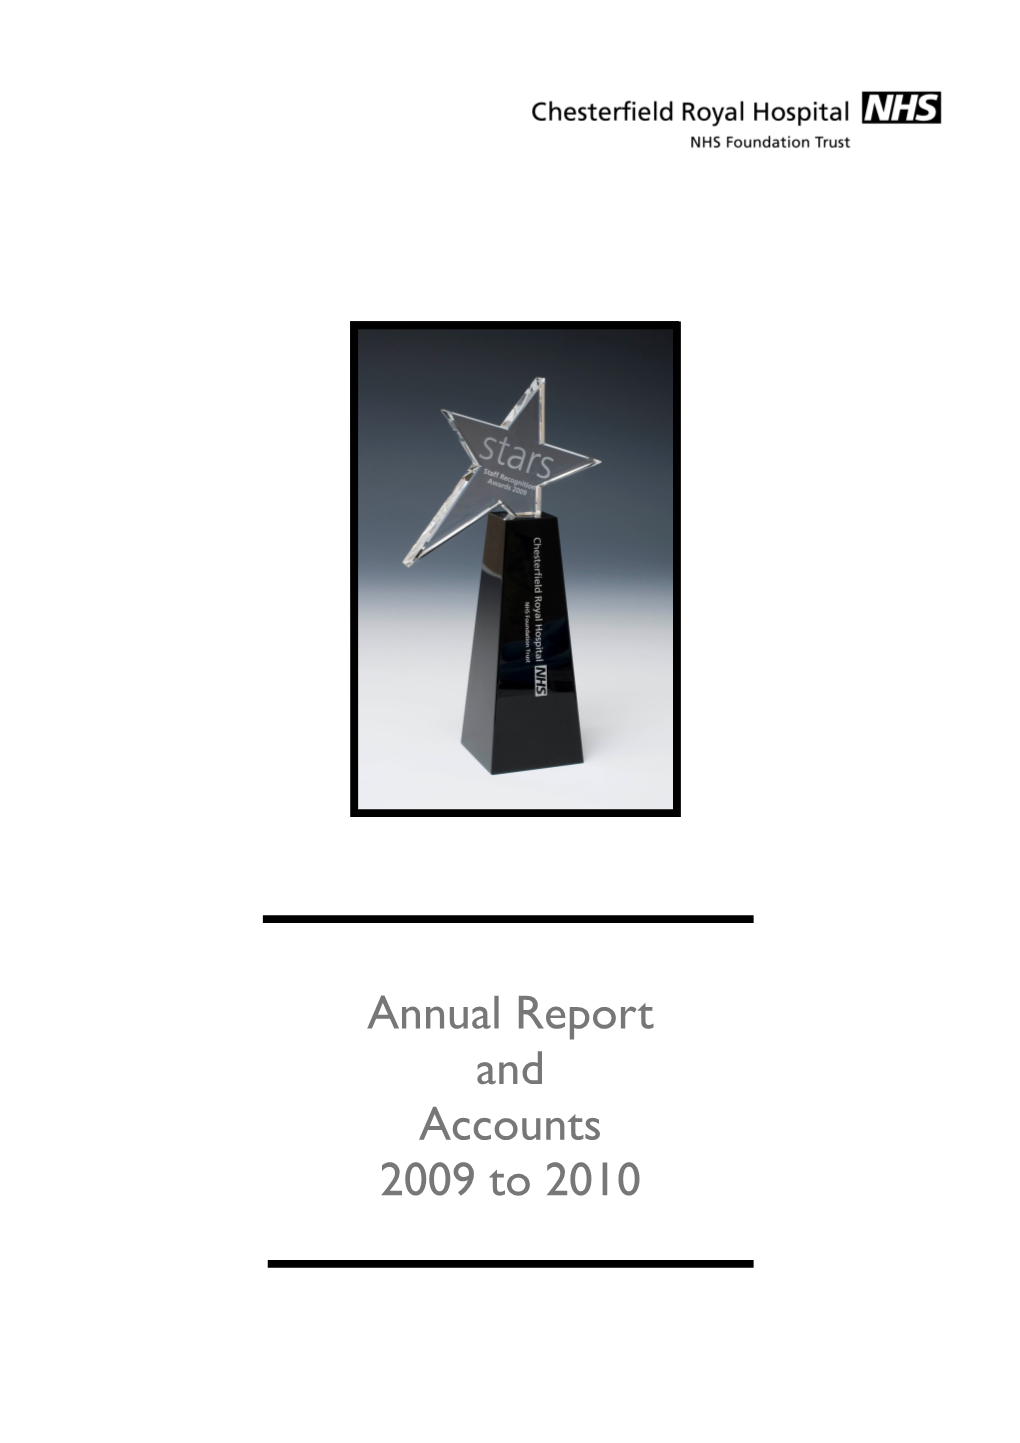 Annual Report and Accounts 2009 to 2010